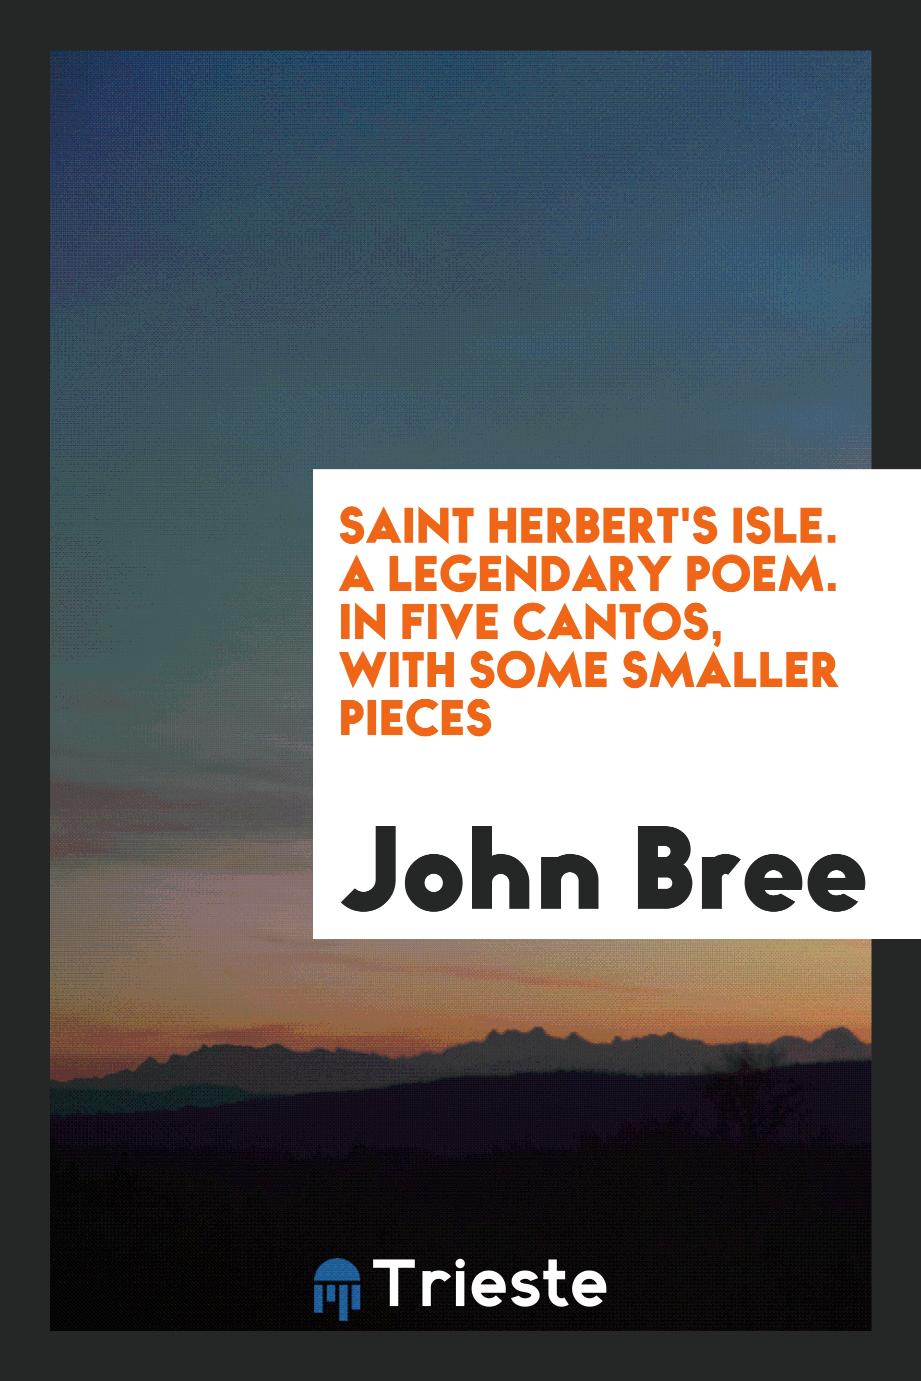 Saint Herbert's Isle. A Legendary Poem. In Five Cantos, with Some Smaller Pieces